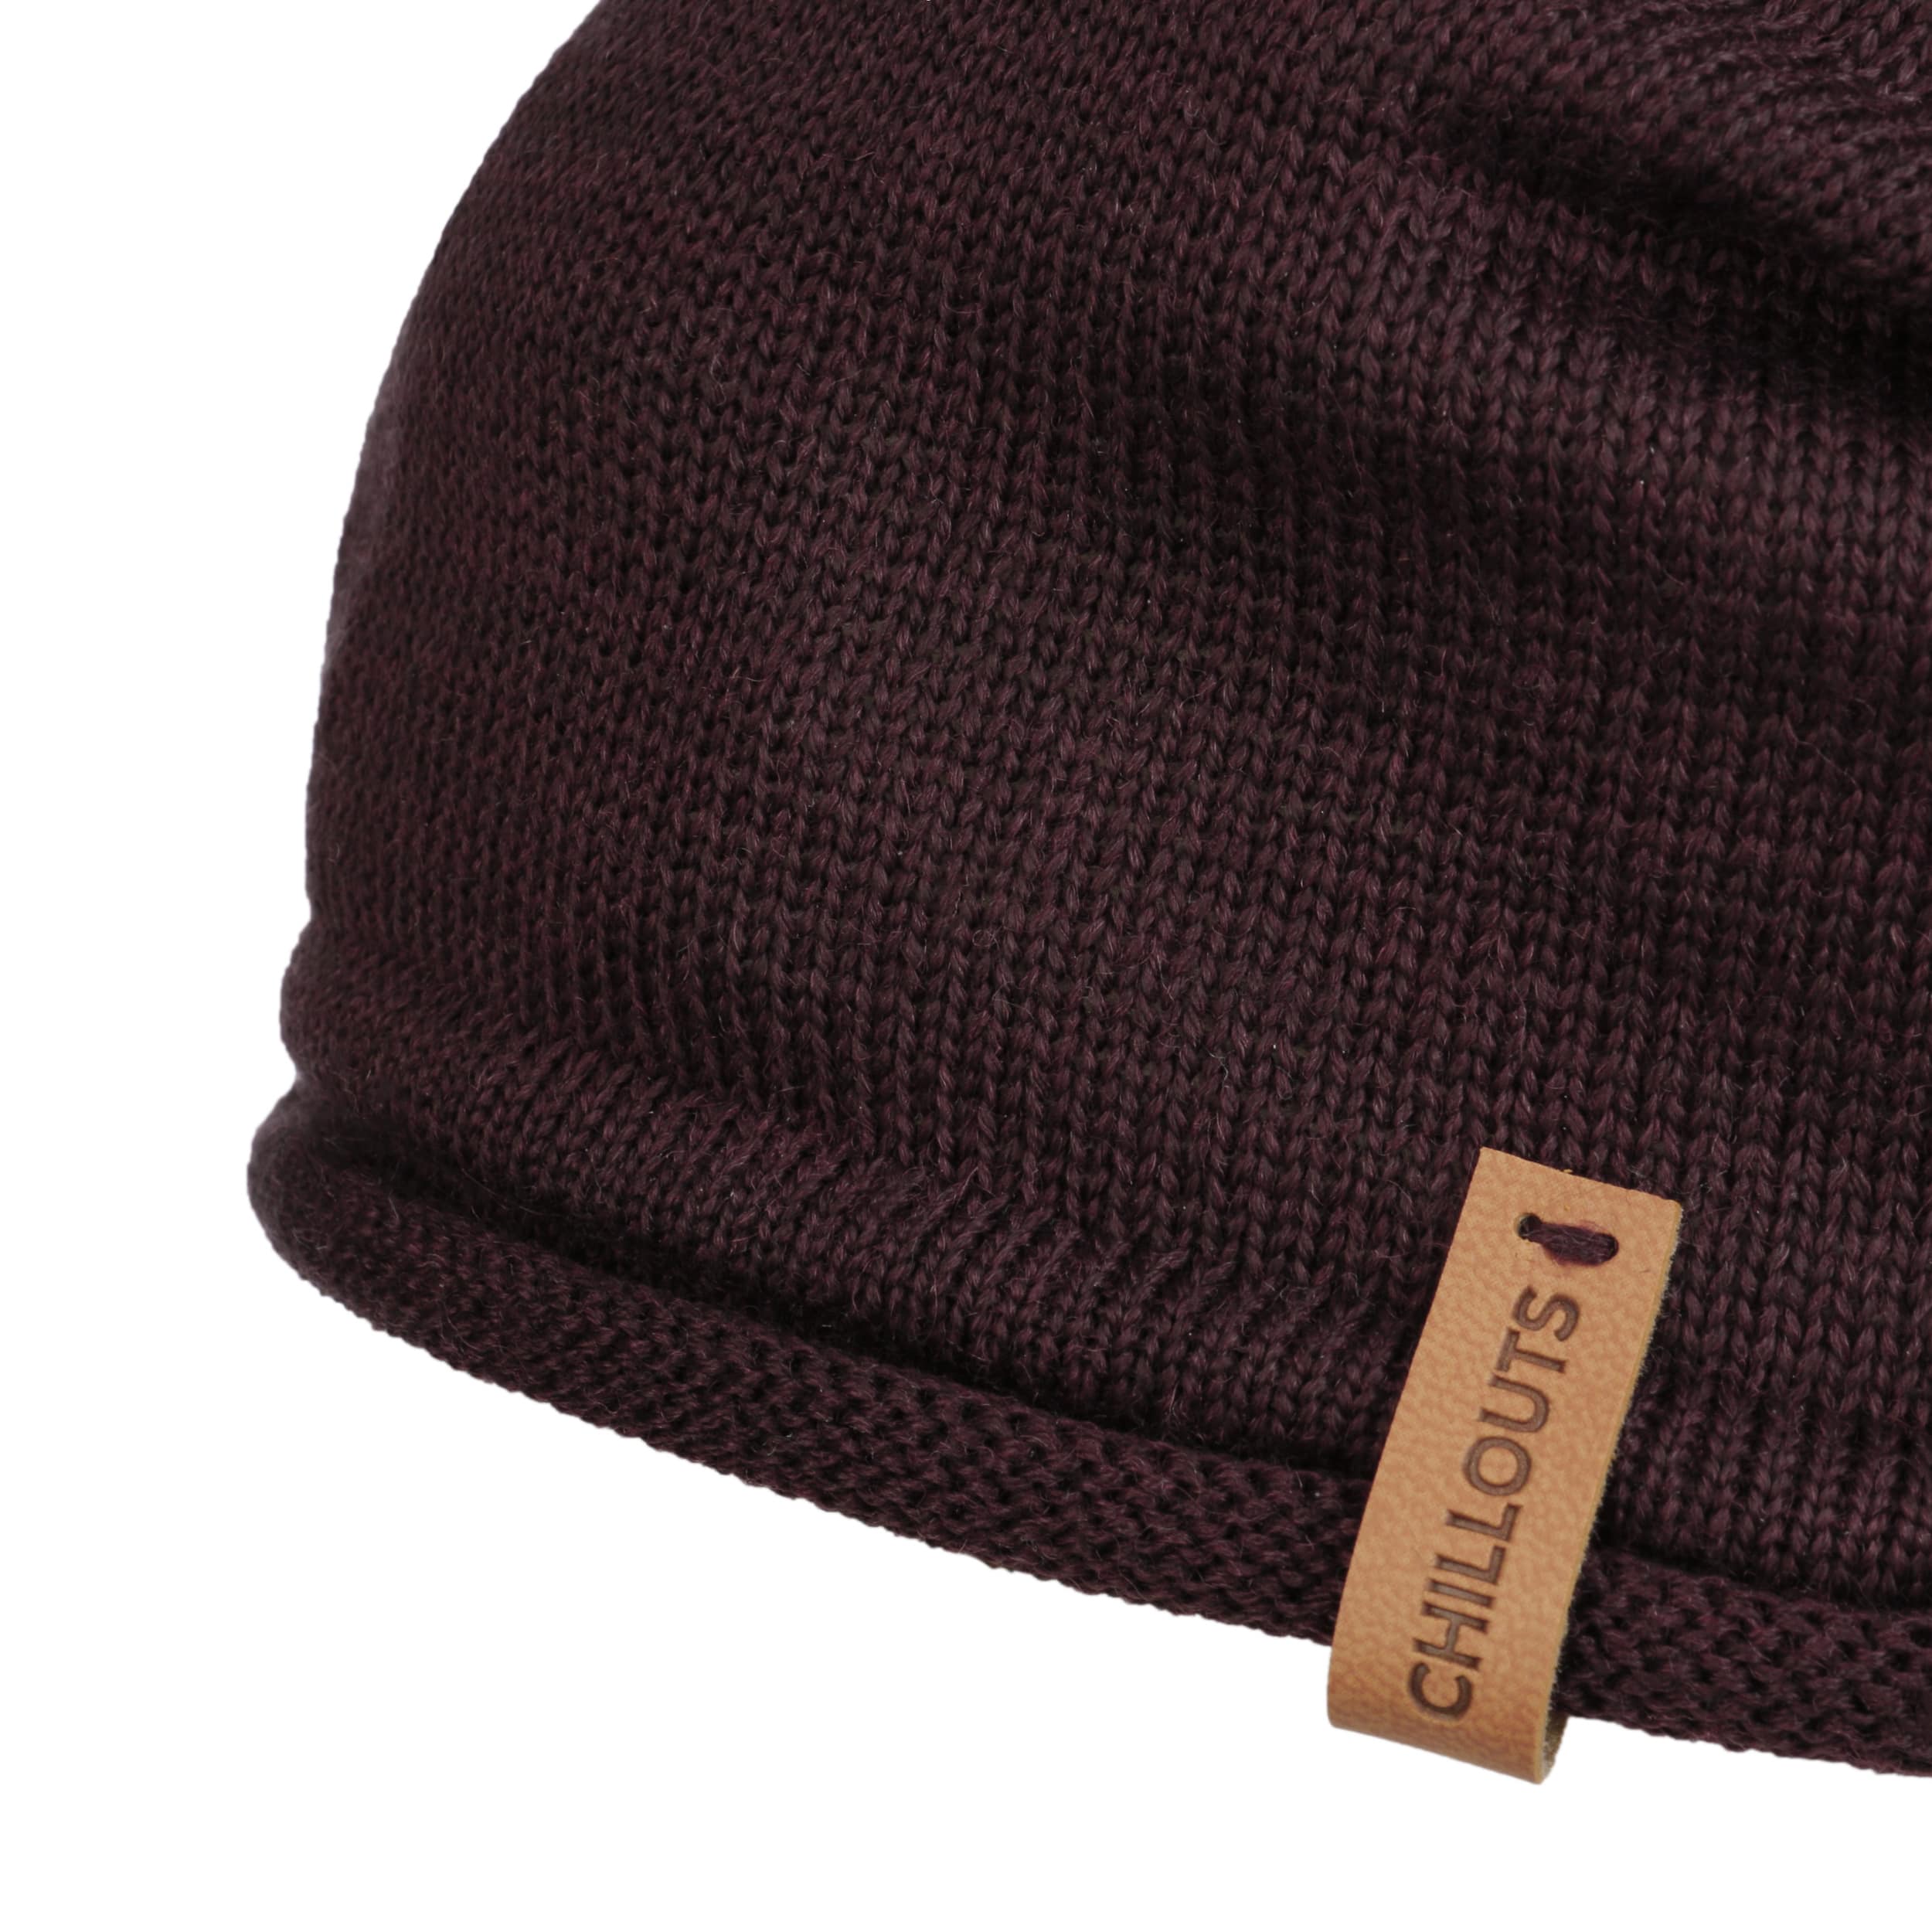 Leicester by 27,99 - Beanie Chillouts Berretto €